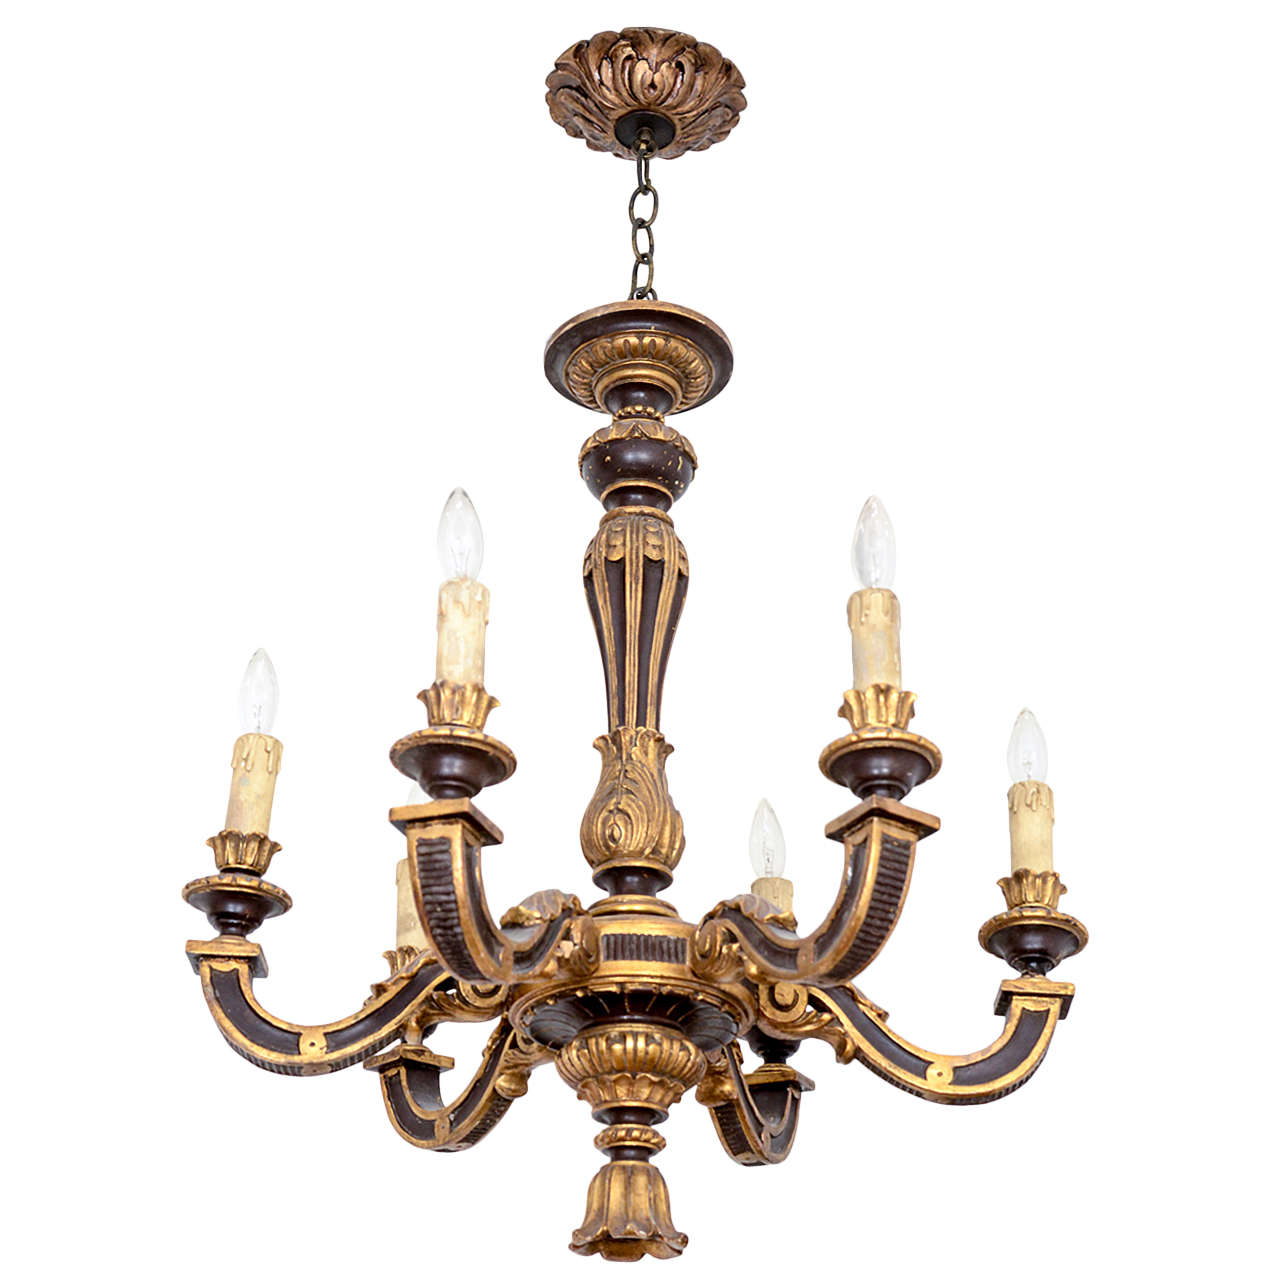 Baroque Style Ebonized and Gilt Wooden Chandelier